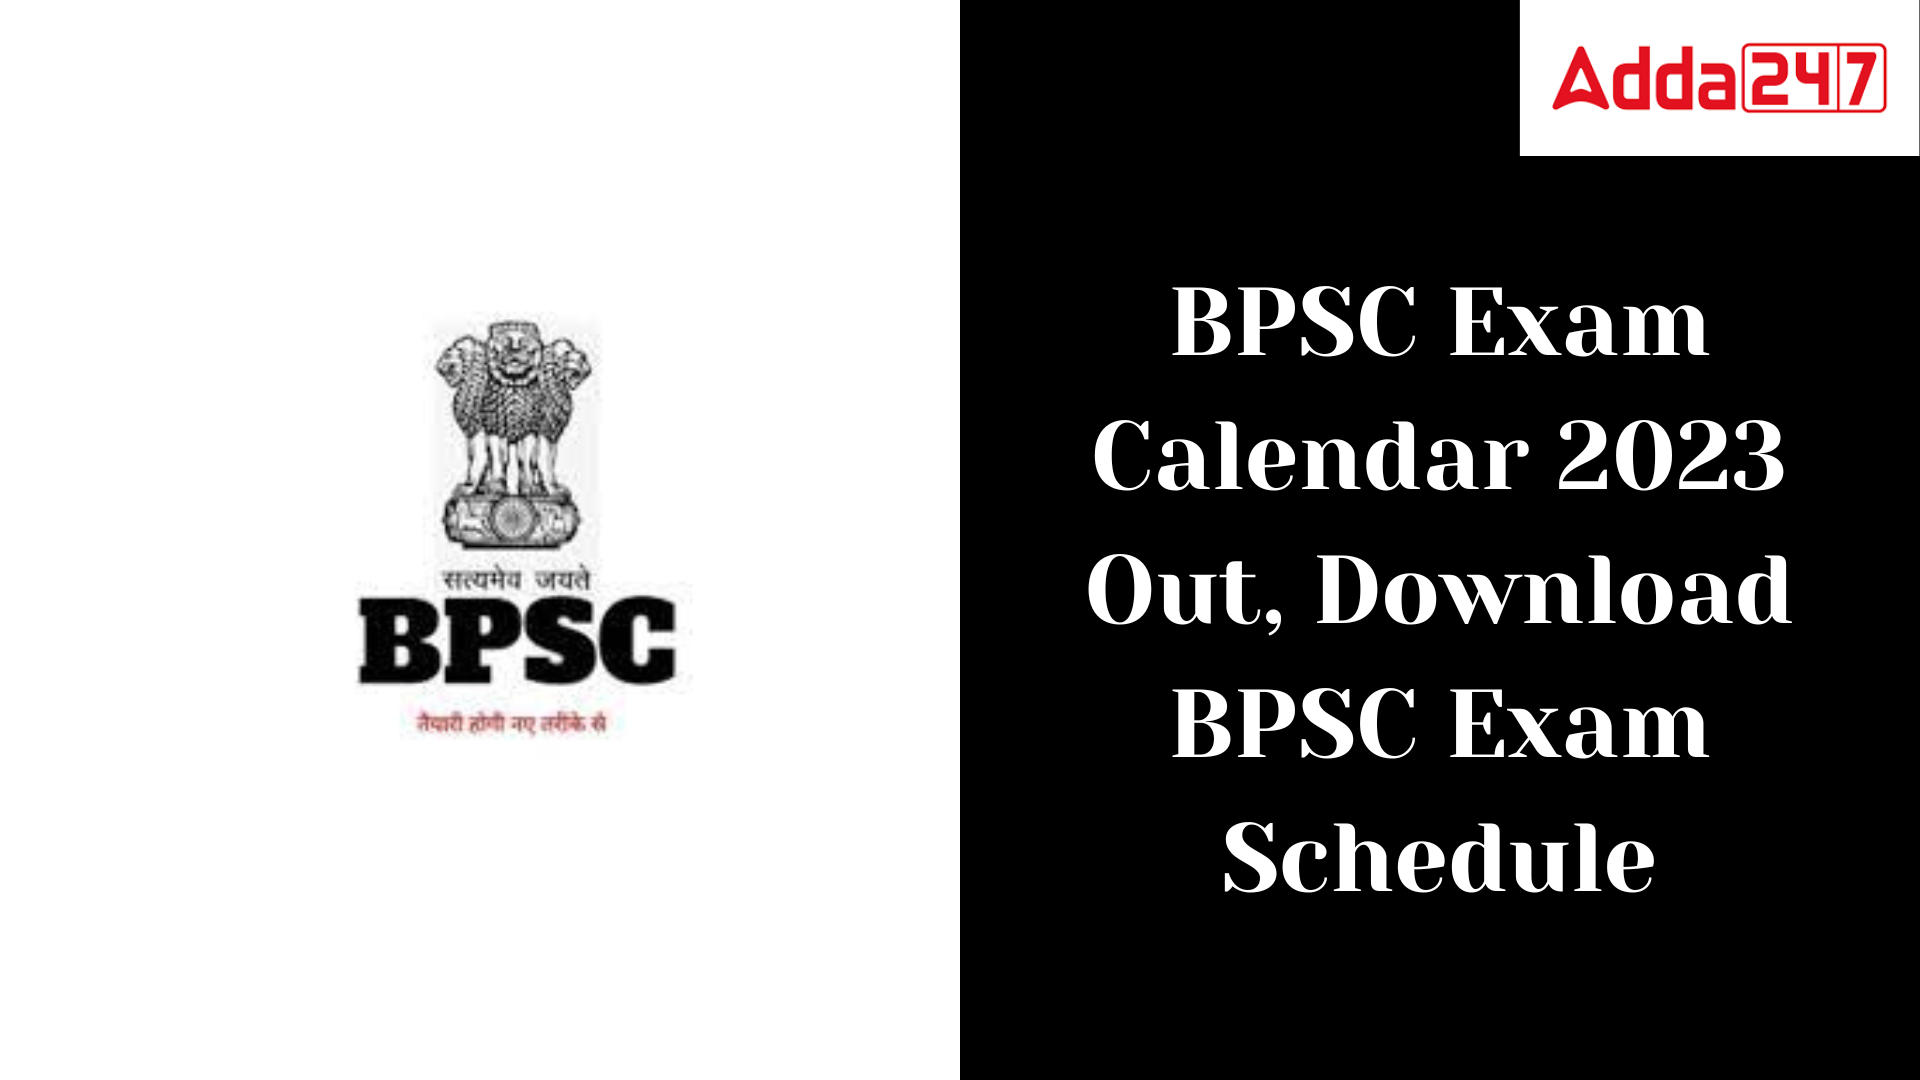 BPSC Exam Calendar 2023 Out, Download BPSC Exam Schedule